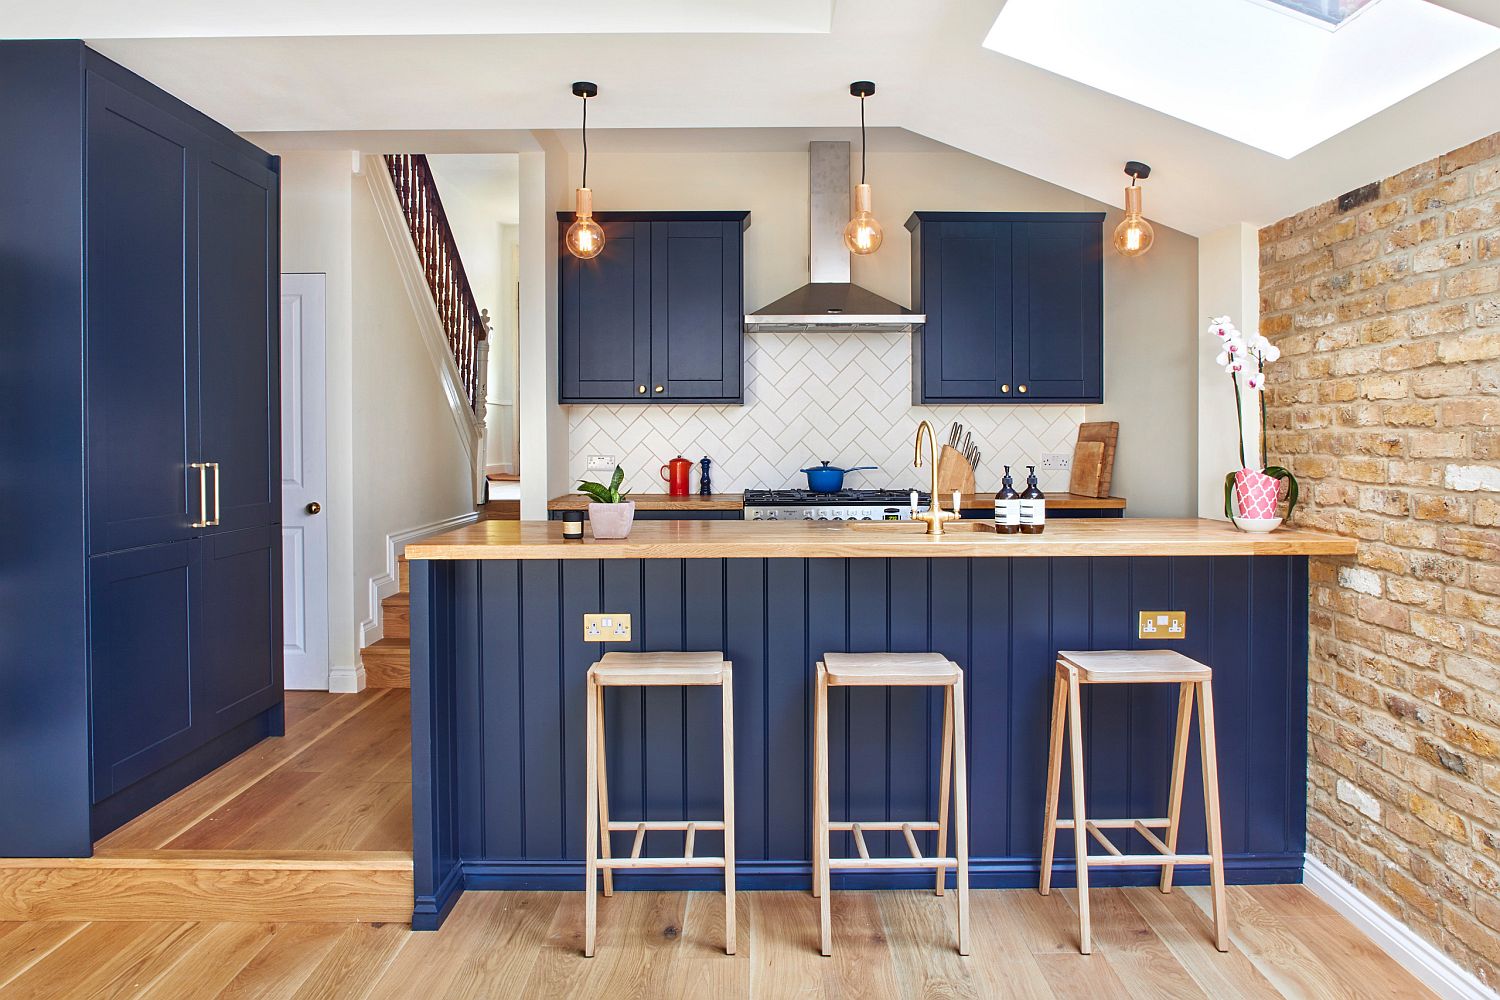 Brick wall, skylight and a splash of blue for the delightful modern kitchen